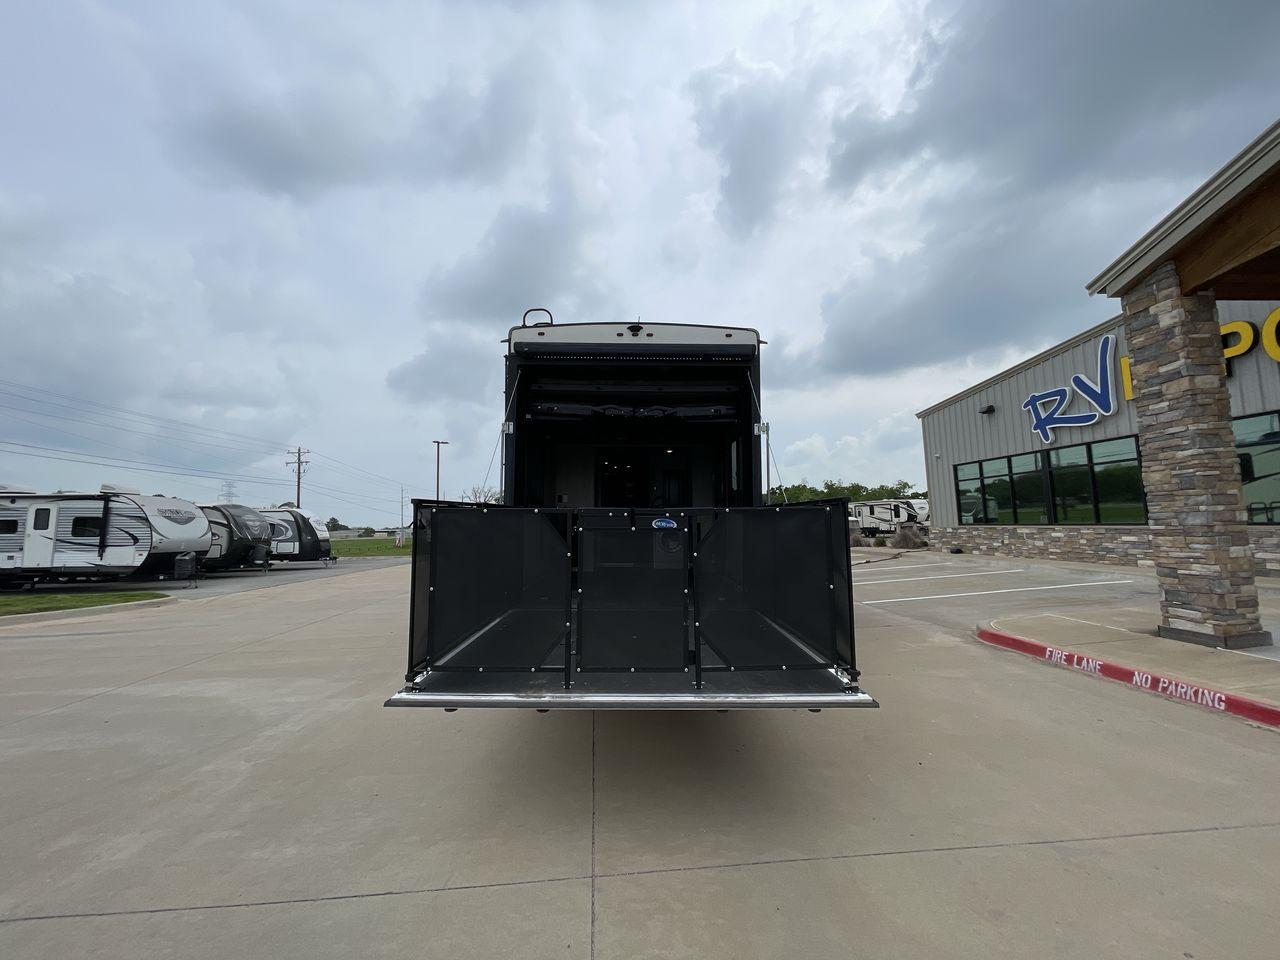 2019 HEARTLAND ROAD WARRIOR 427RW (5SFCG4435KE) , Length: 44.08 ft. | Dry Weight: 16,400 lbs. | Gross Weight: 20,000 lbs. | Slides: 2 transmission, located at 4319 N Main St, Cleburne, TX, 76033, (817) 678-5133, 32.385960, -97.391212 - Photo #27